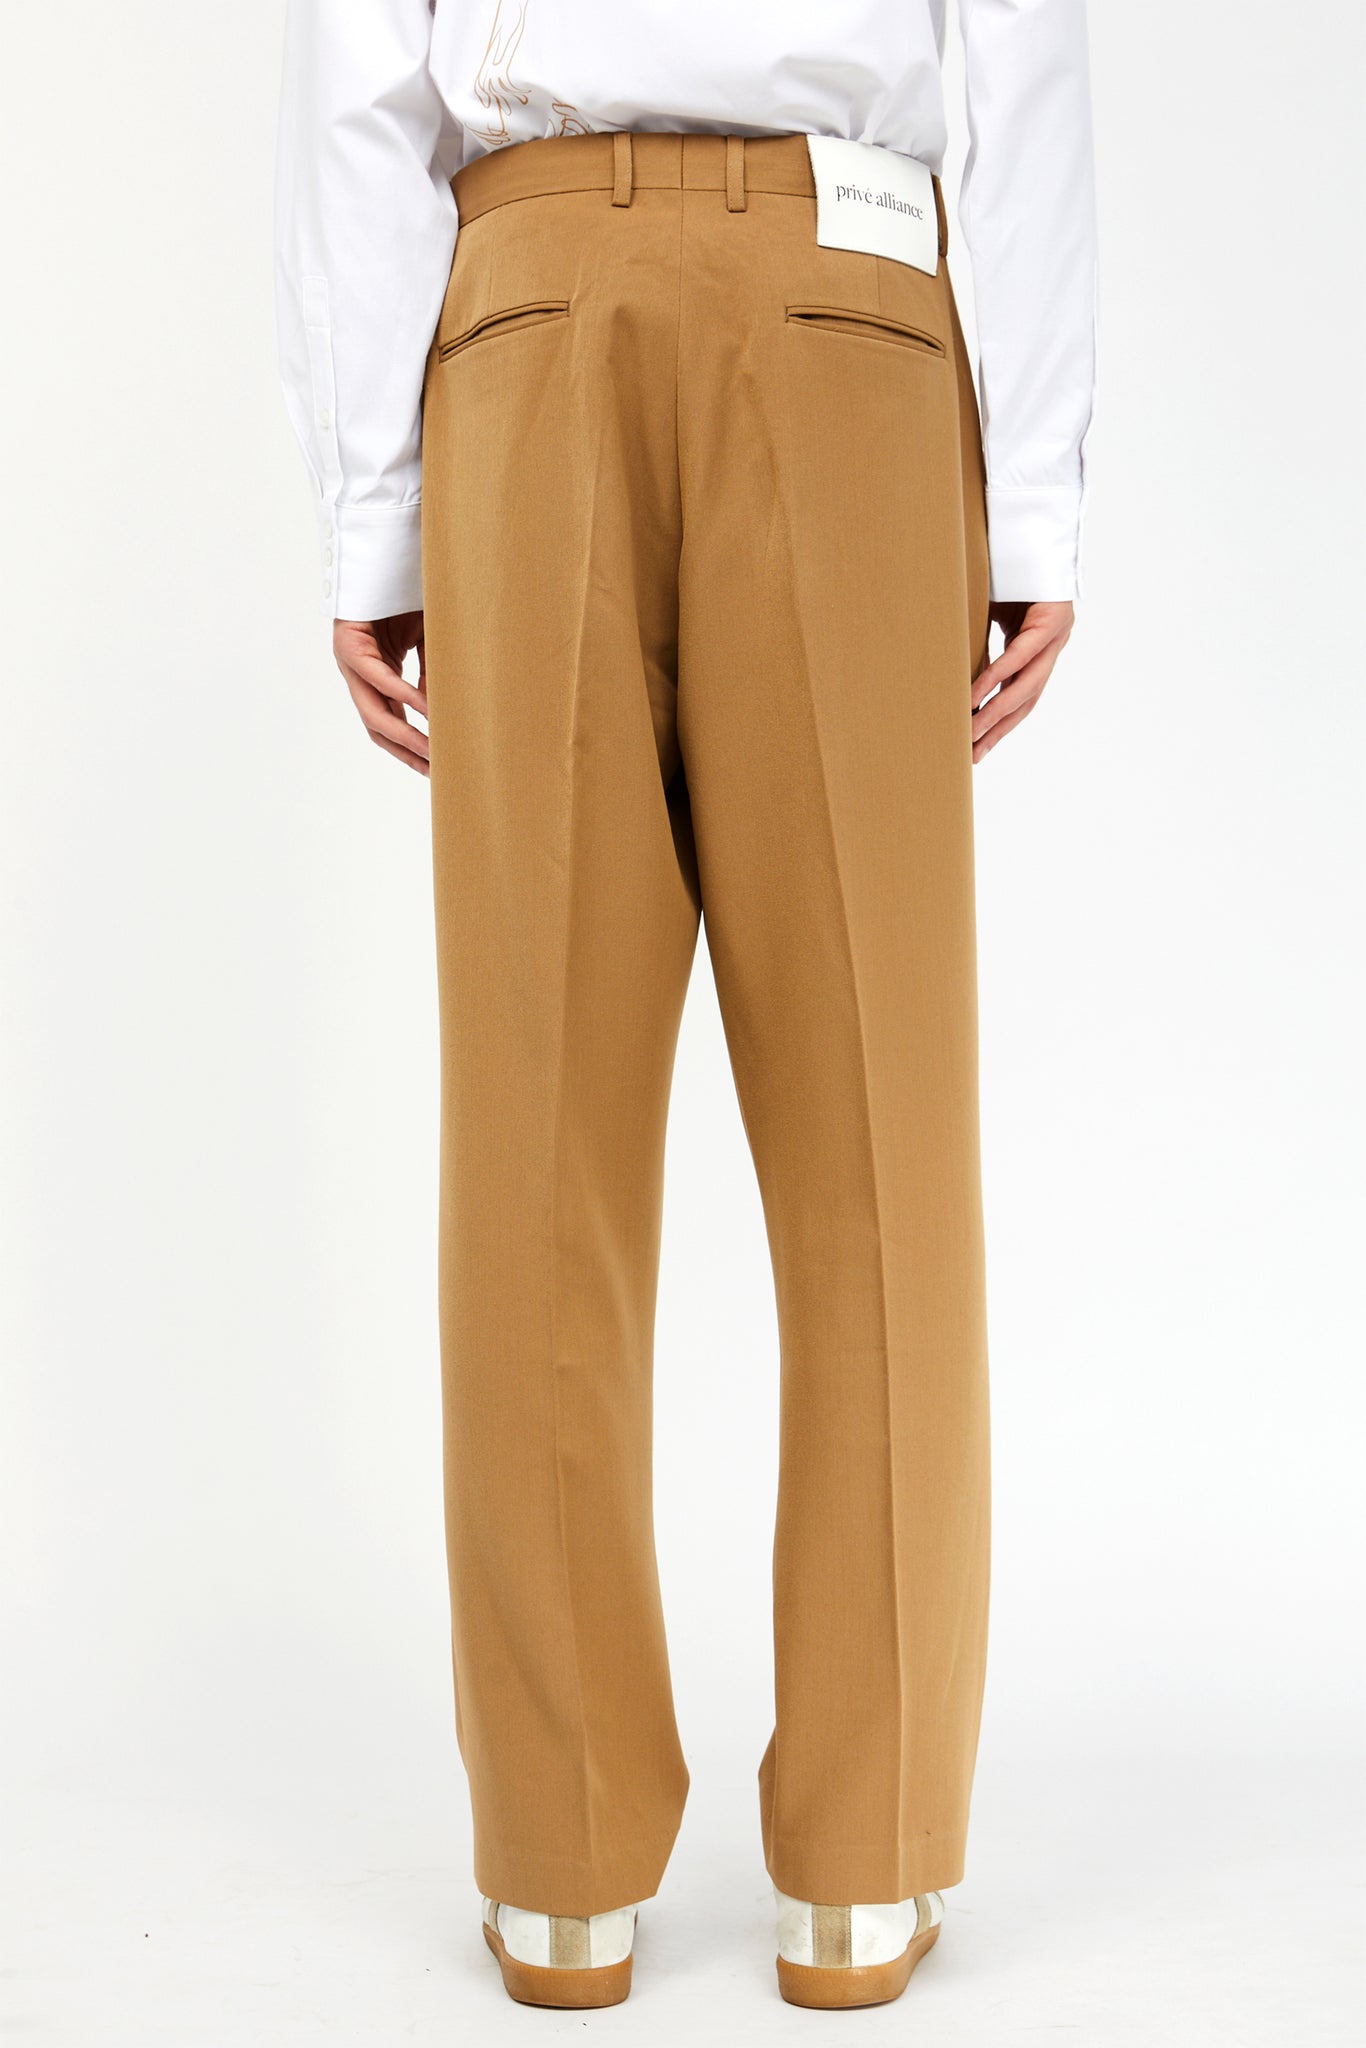 Bershka Regular Pleat-Front Pants in Sand | ABOUT YOU